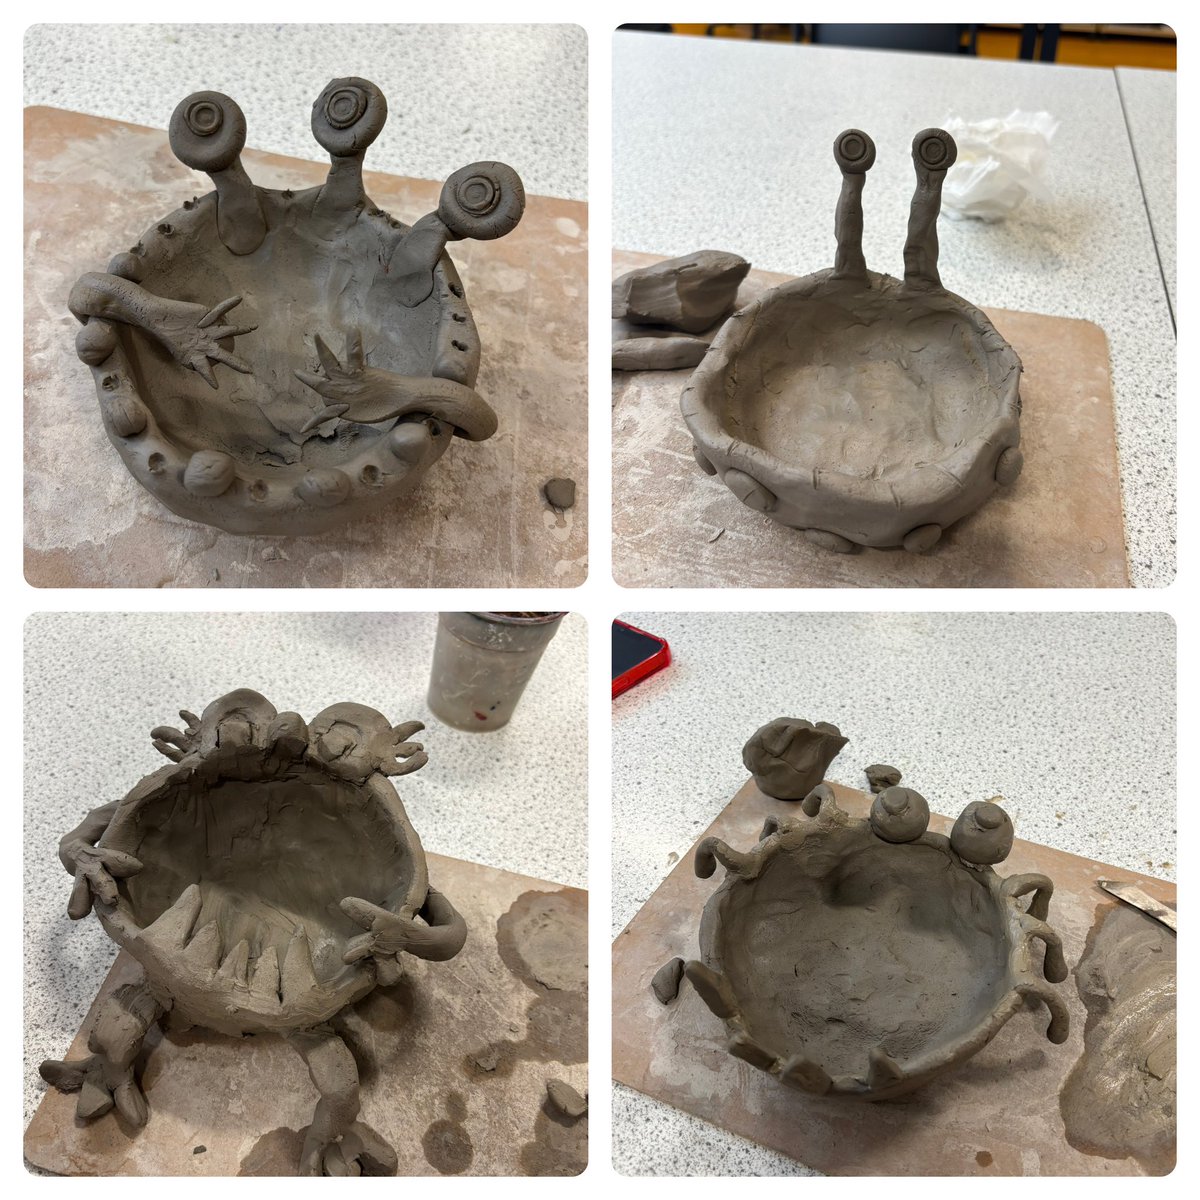 Our creative staff made some amazing monsters at today’s Health and Wellbeing sessions! Check out the sculptures this talented group made in just 50 minutes! @clydeview_a 👏🏻👏🏻👹